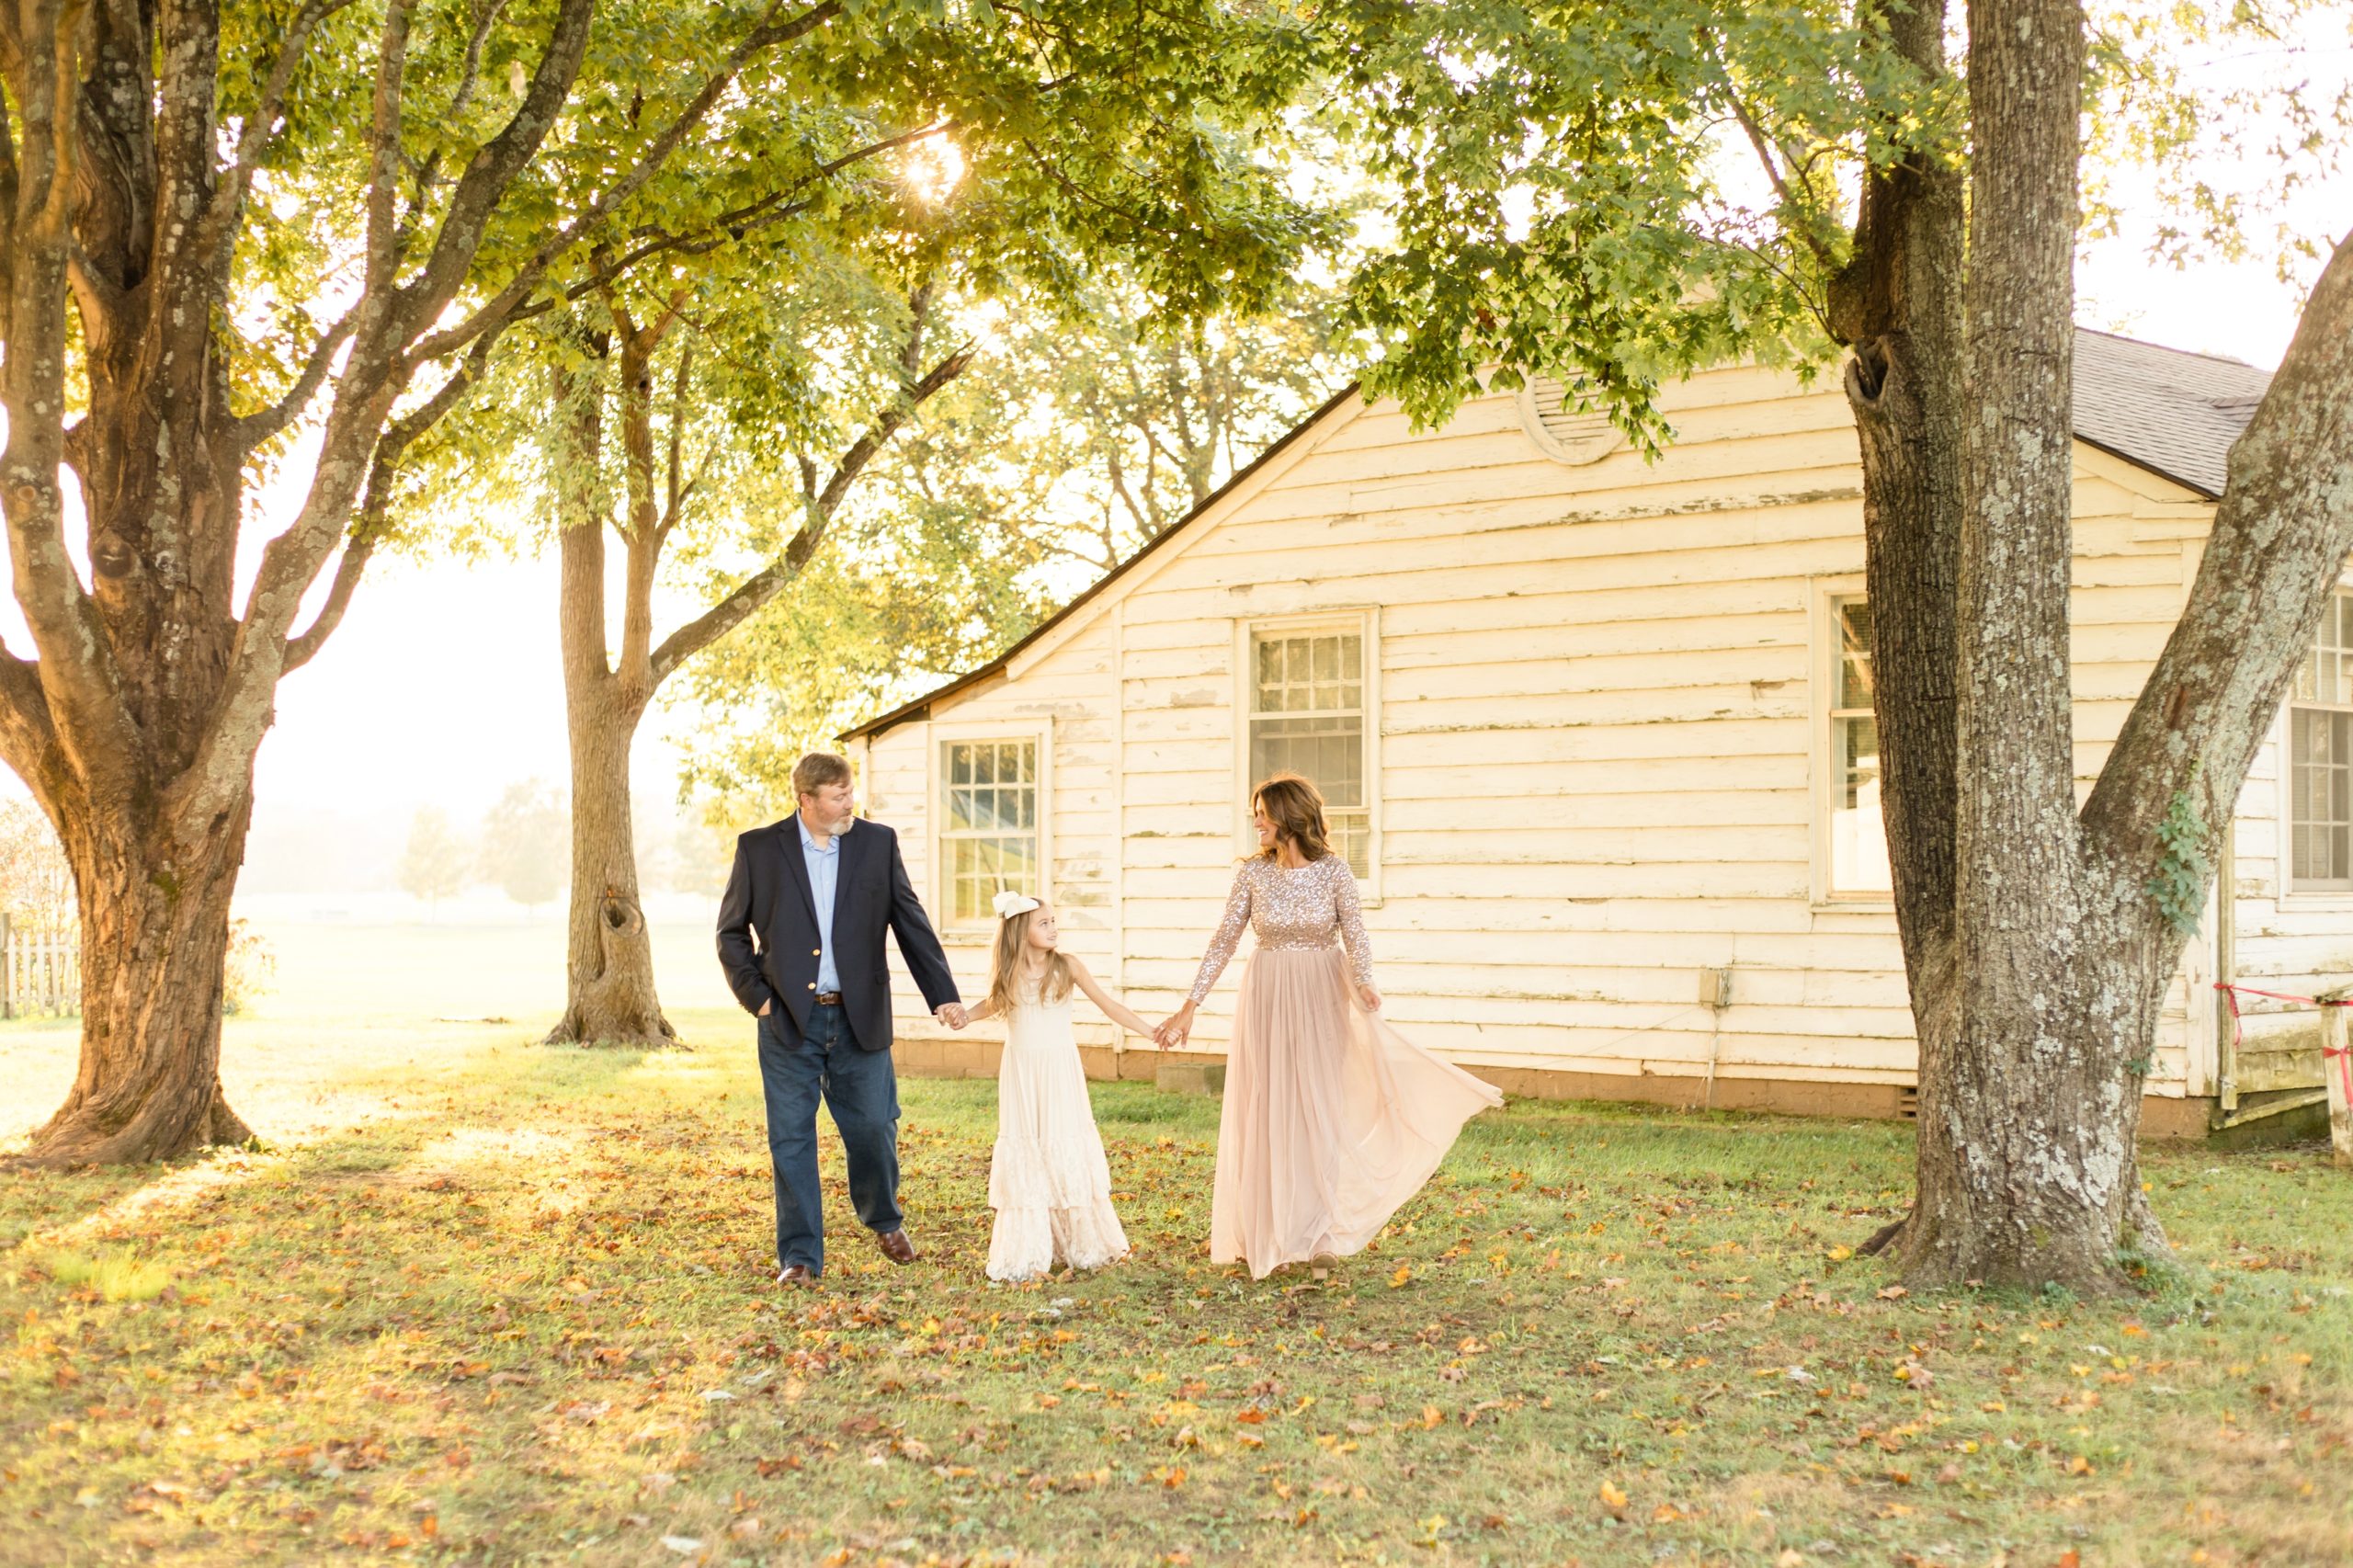 Family walks hand in hand in front of farm house at Harlinsdale farm in Franklin, TN during family portrait session with Wisp + Willow Photography Co.